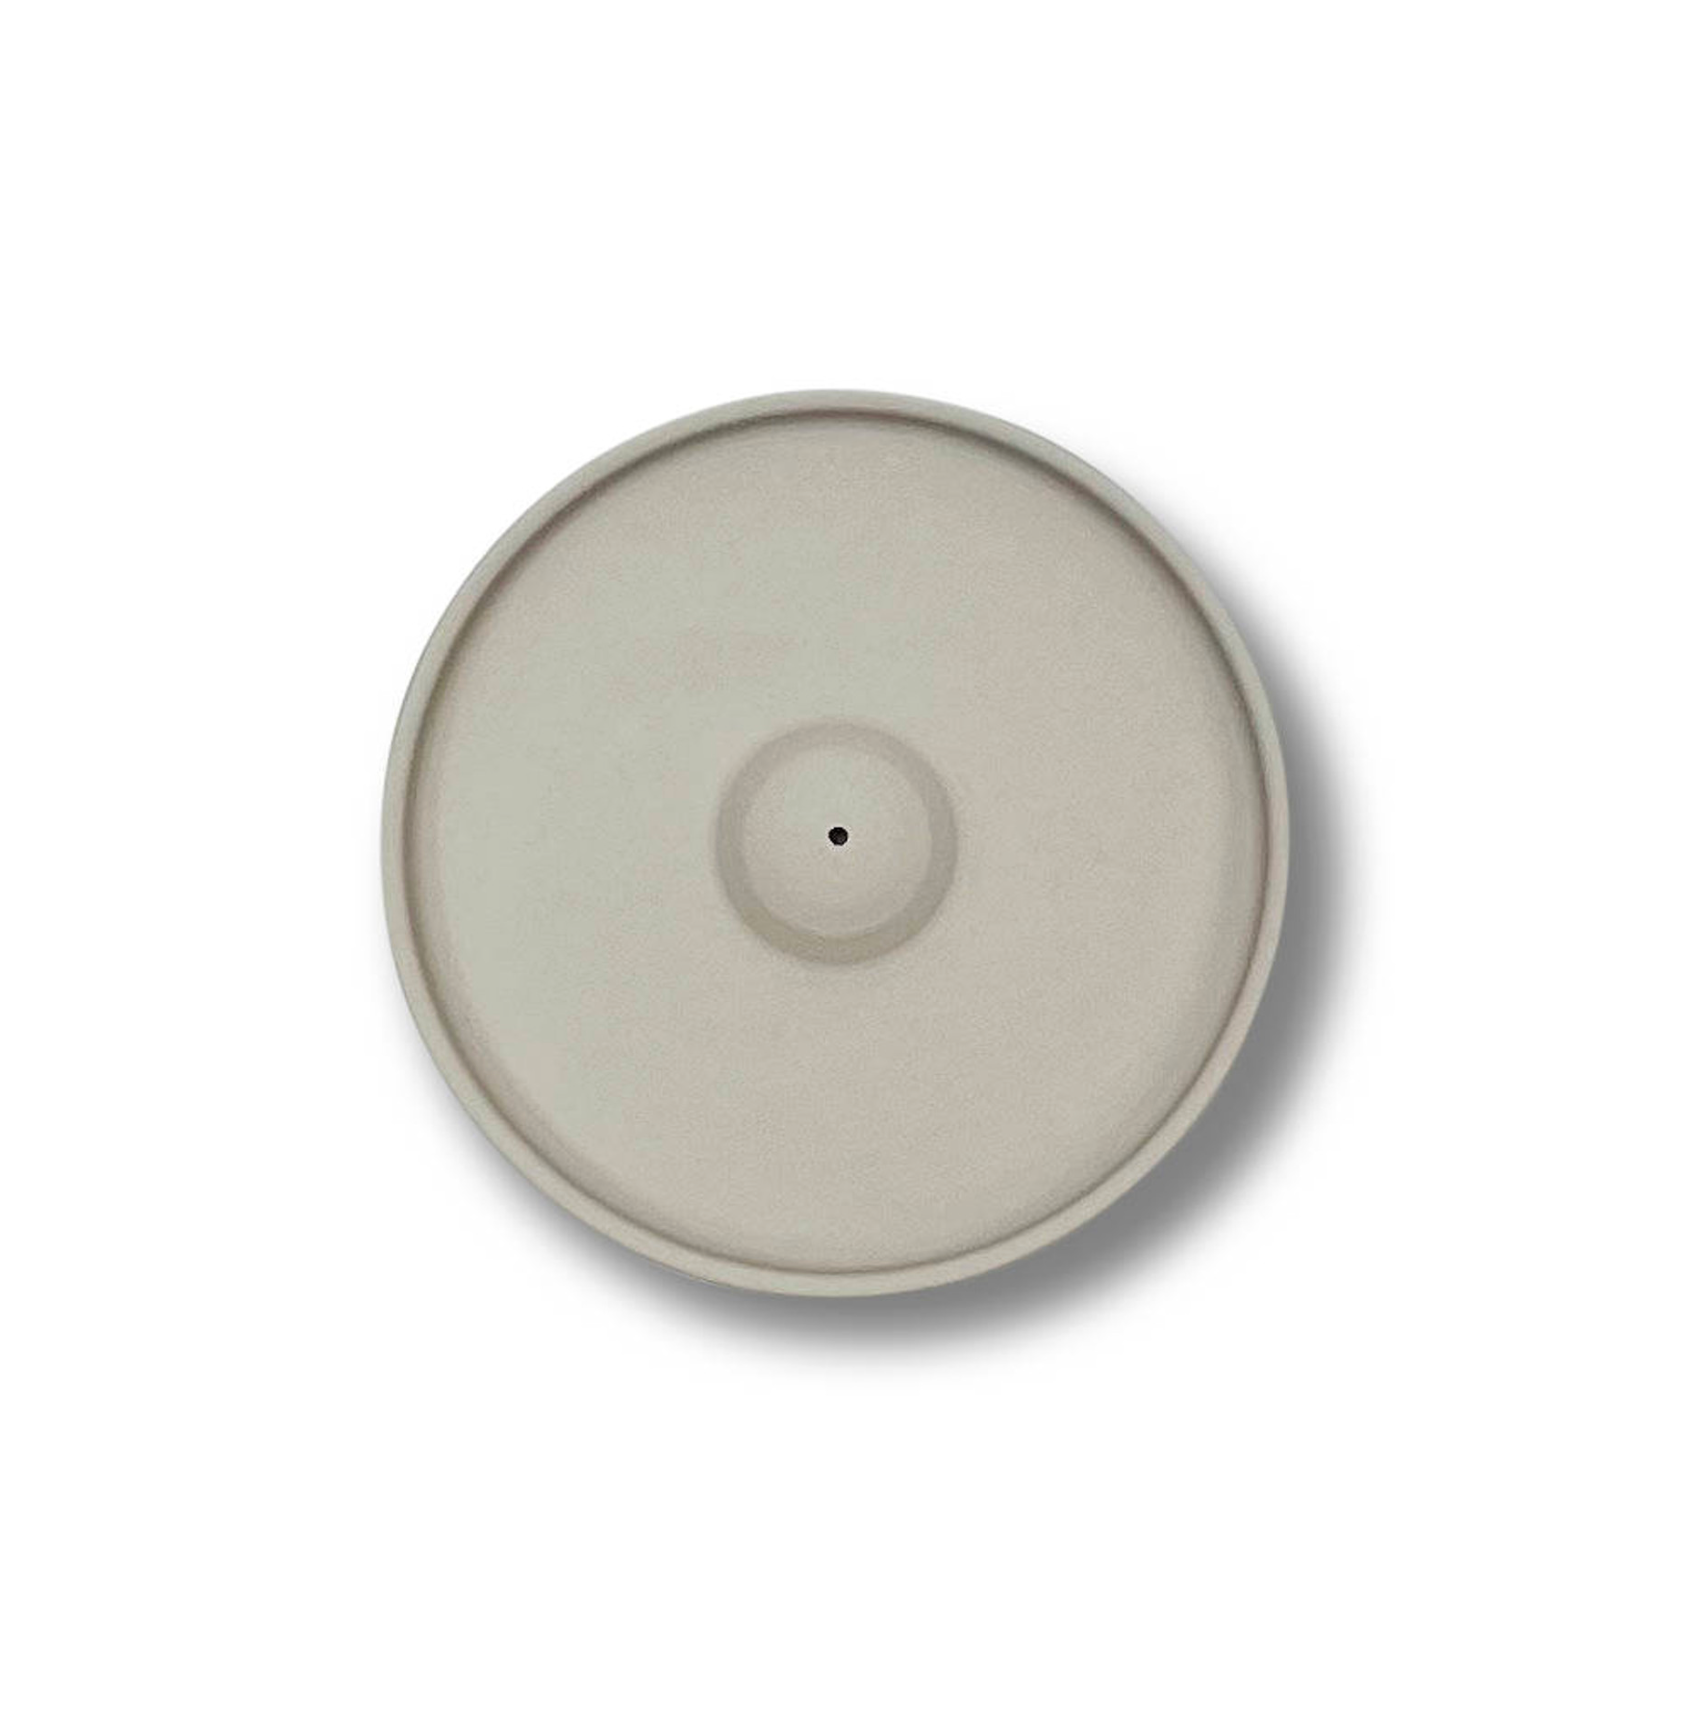 INCENSE PLATE - GREY